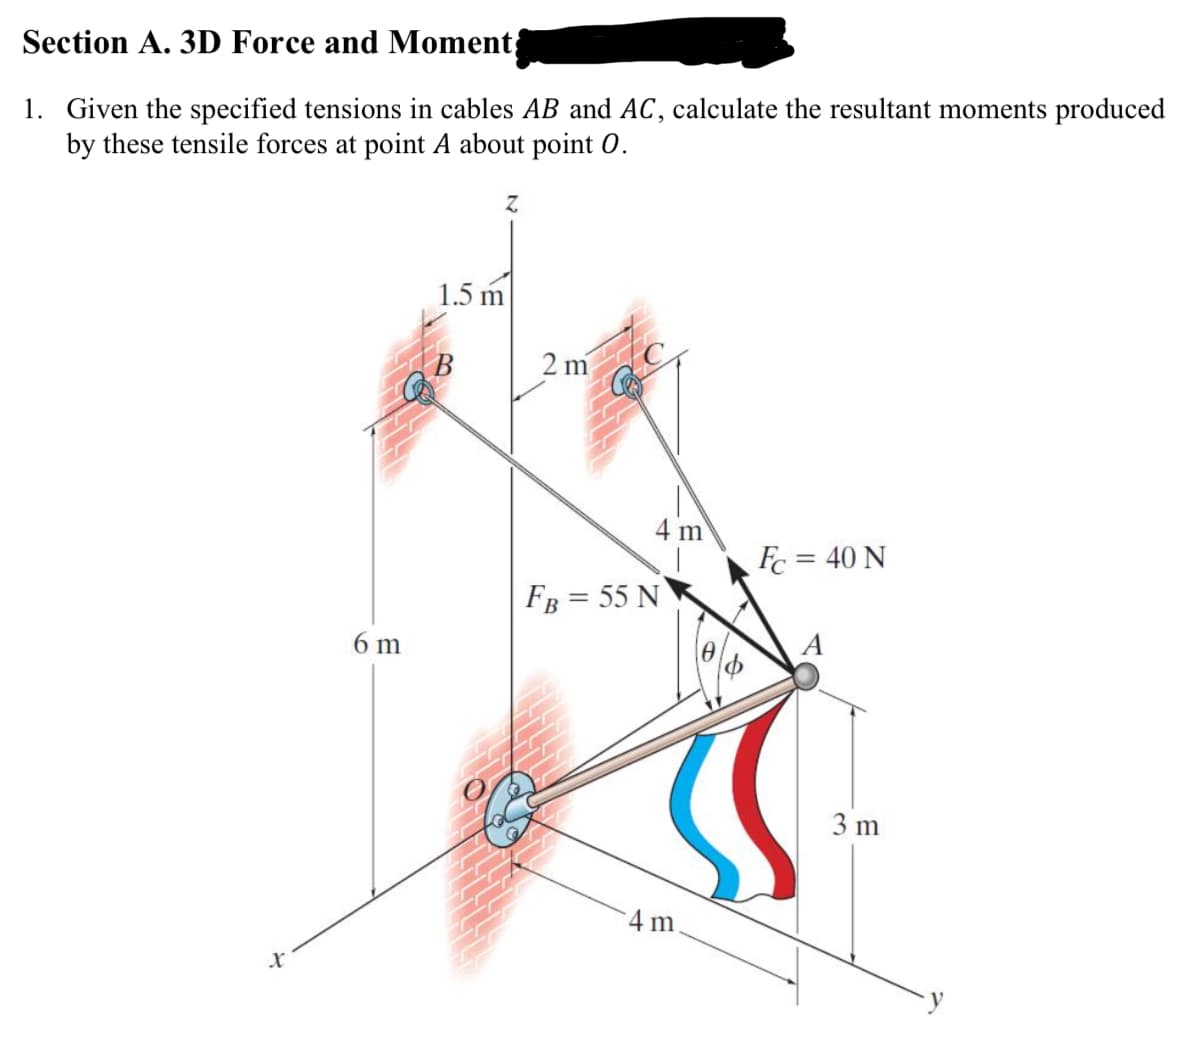 Section A. 3D Force and Moment
1. Given the specified tensions in cables AB and AC, calculate the resultant moments produced
by these tensile forces at point A about point O.
Z
x
6 m
1.5 m
2 m
FB = 55 N
4 m
m
Fc = 40 N
A
A
3 m